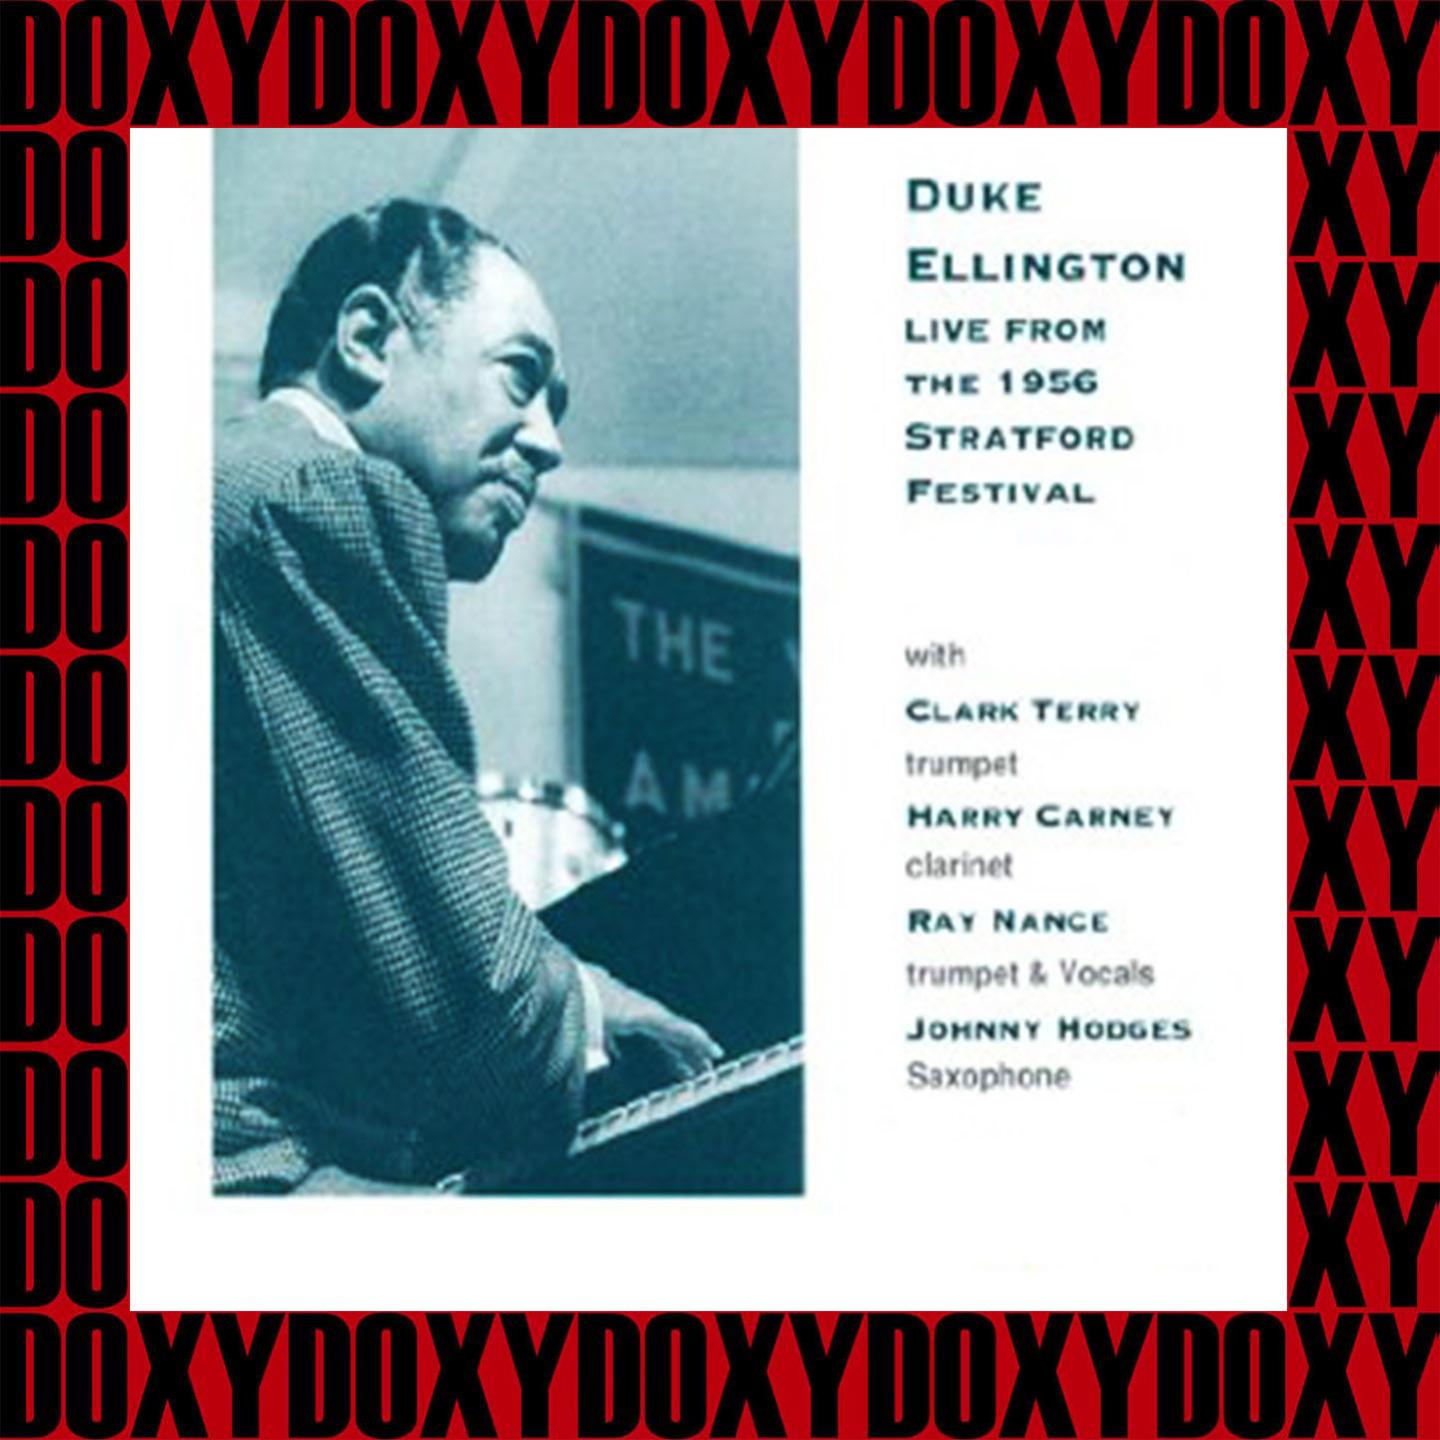 Live 1956 Stratford Fest (Remastered Version) (Doxy Collection)